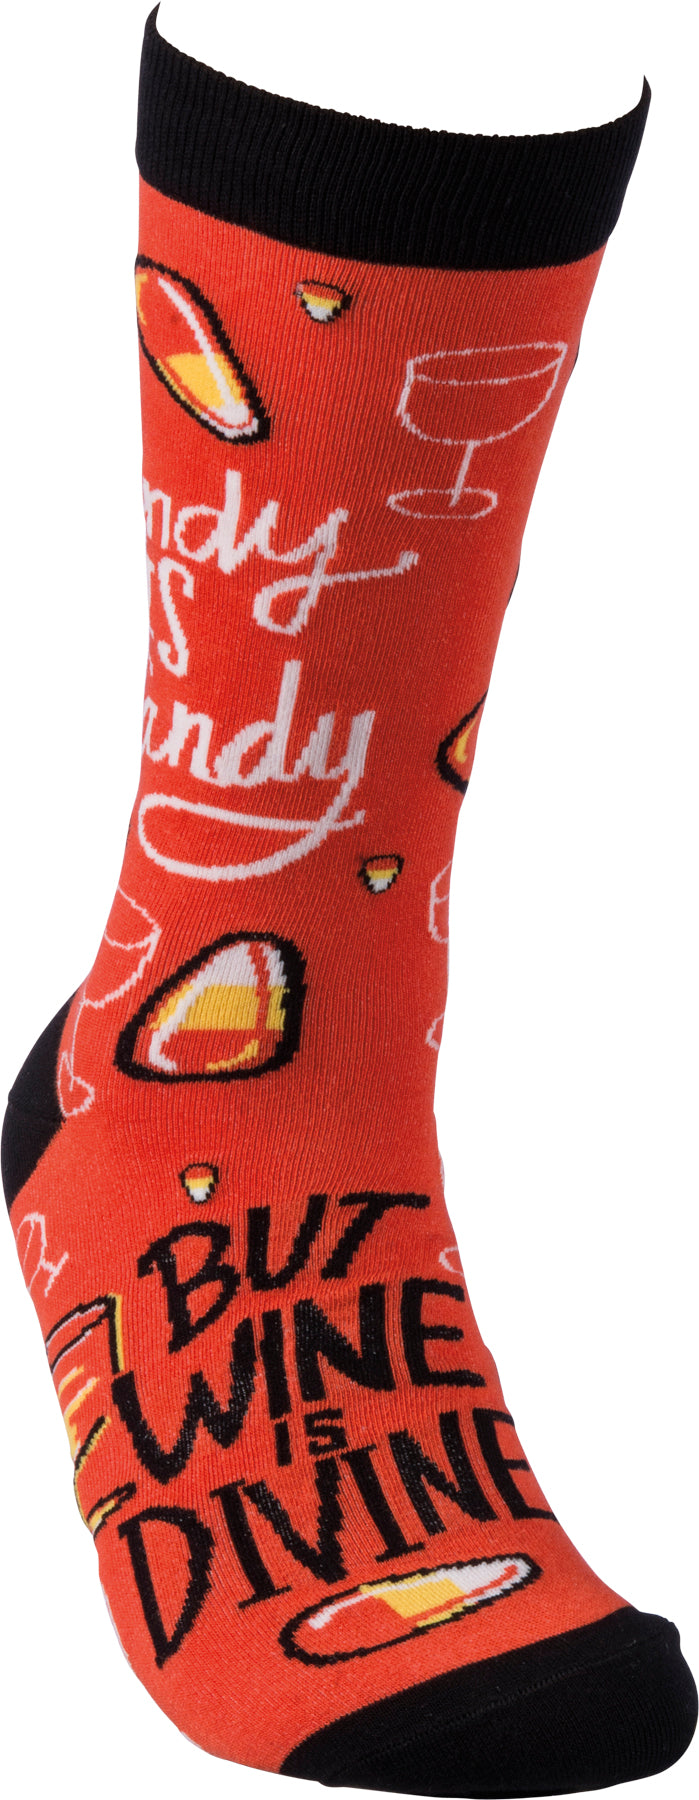 Candy Is Dandy But Wine Is Divine Socks  (Pack of 4)